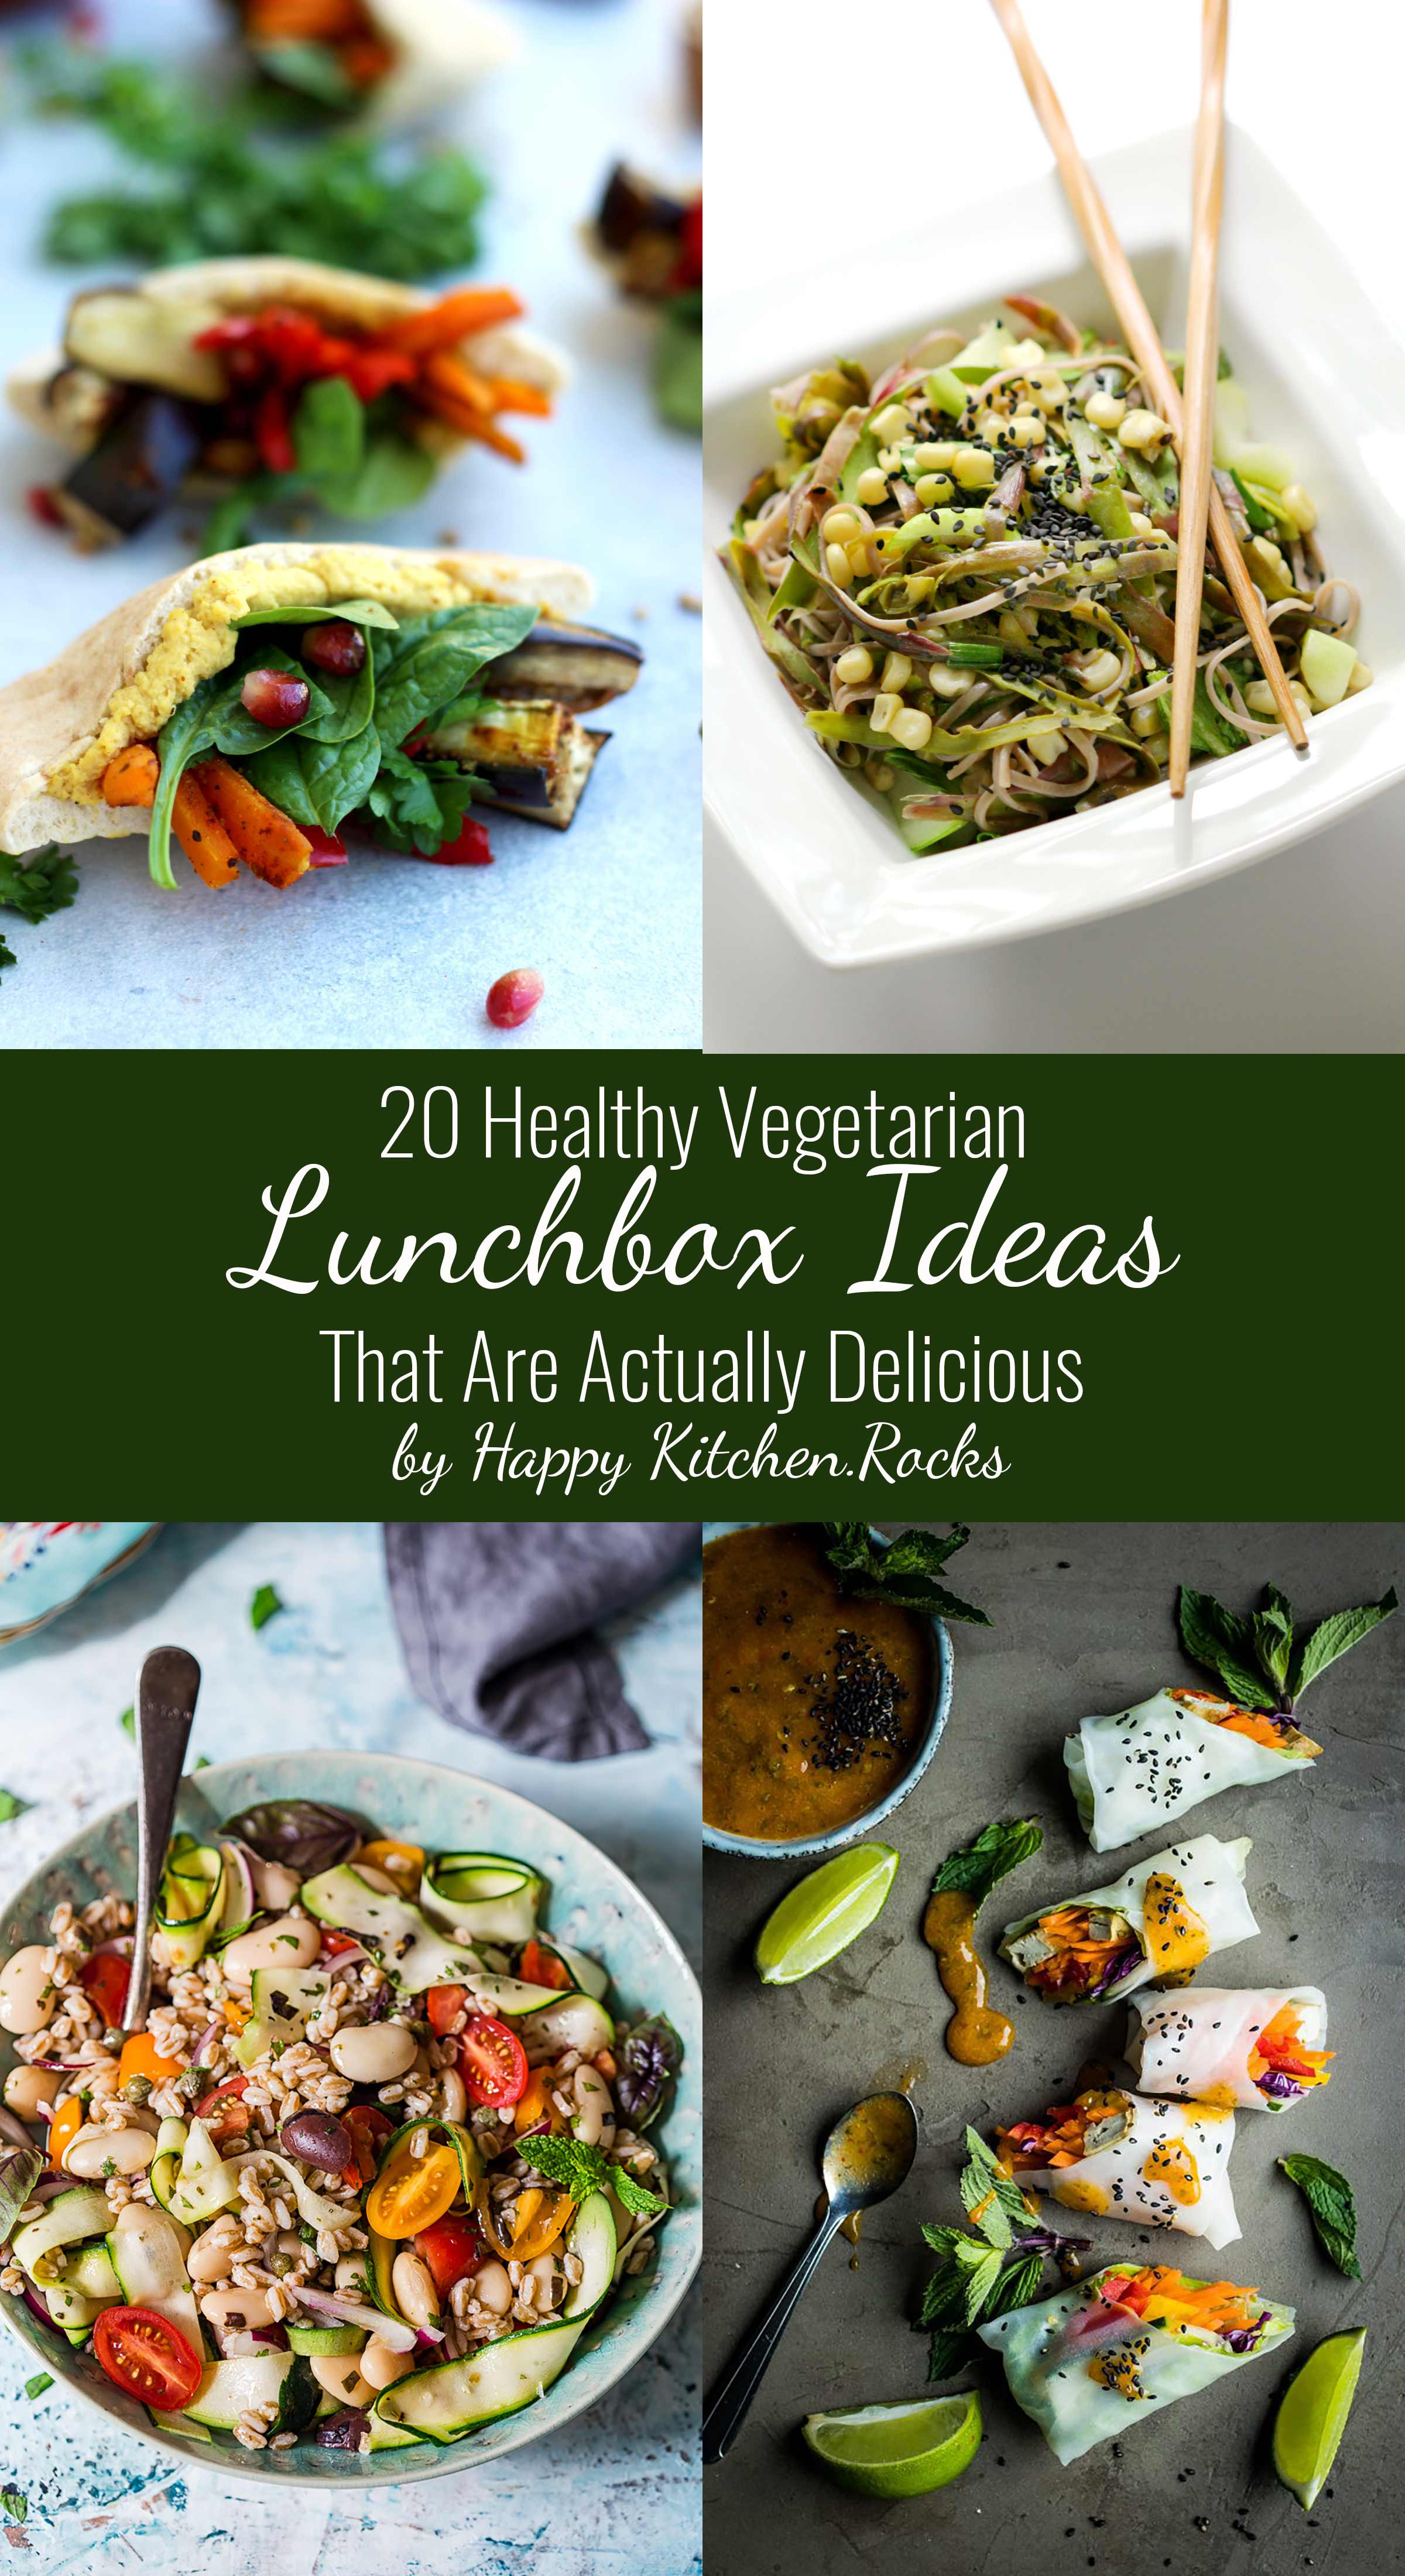 Healthy Vegetarian Dinner Ideas
 20 Healthy Ve arian Lunchbox Ideas That Are Actually